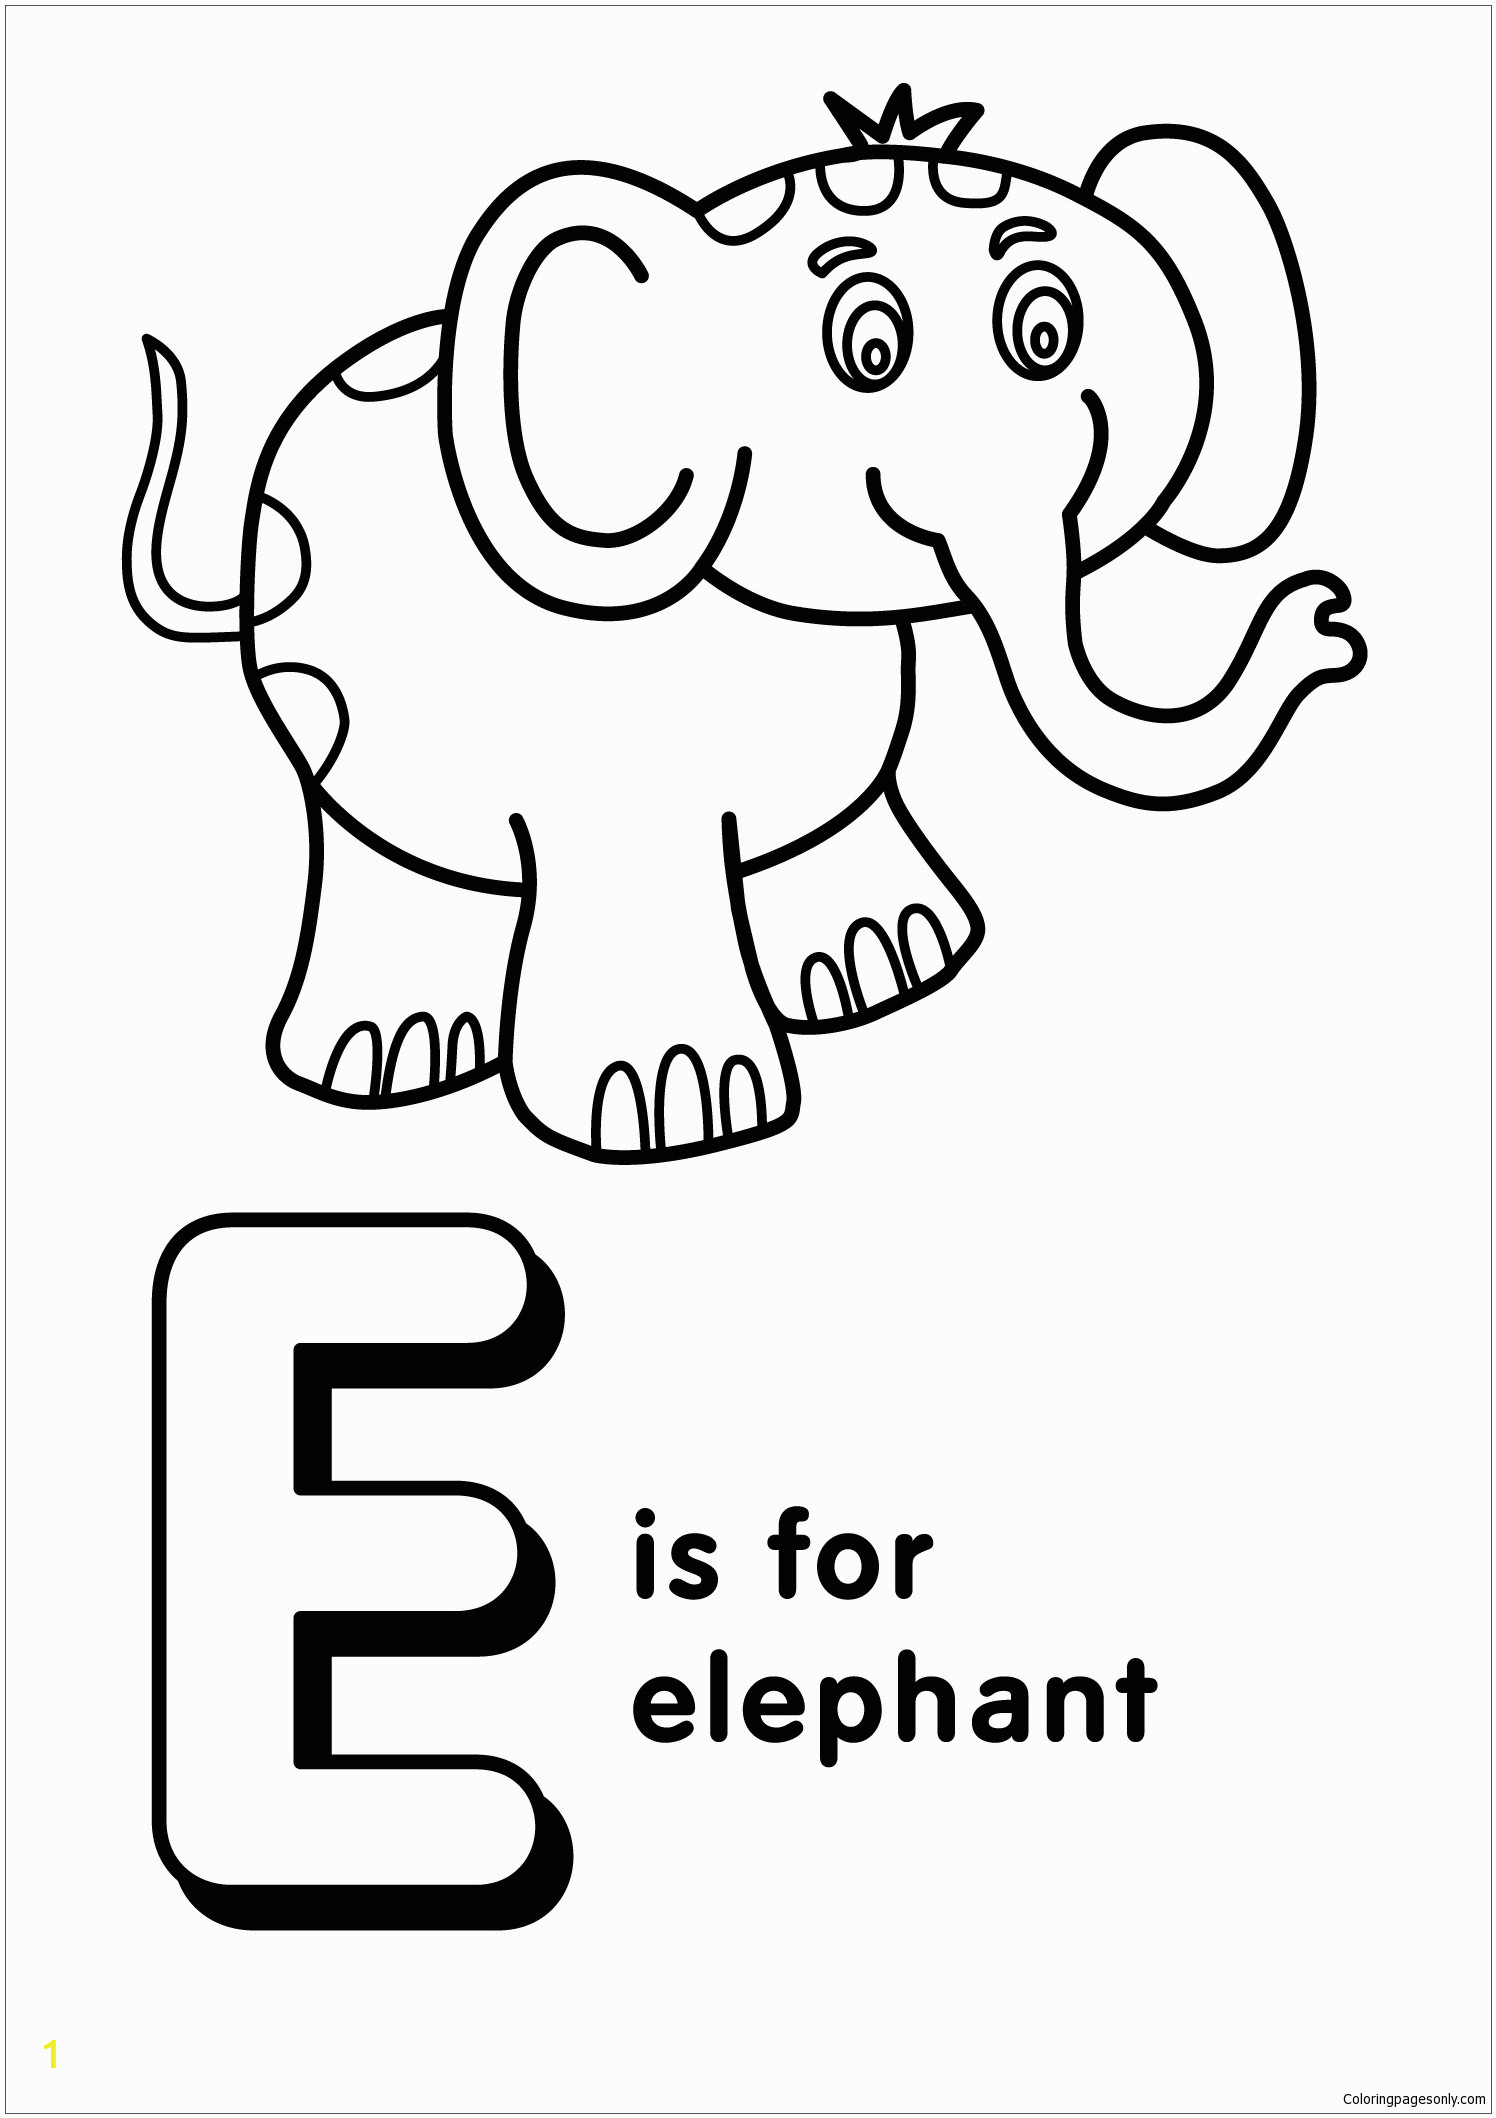 E is for Elephant Coloring Pages Letter E is for Elephant 2 Coloring Page Free Coloring